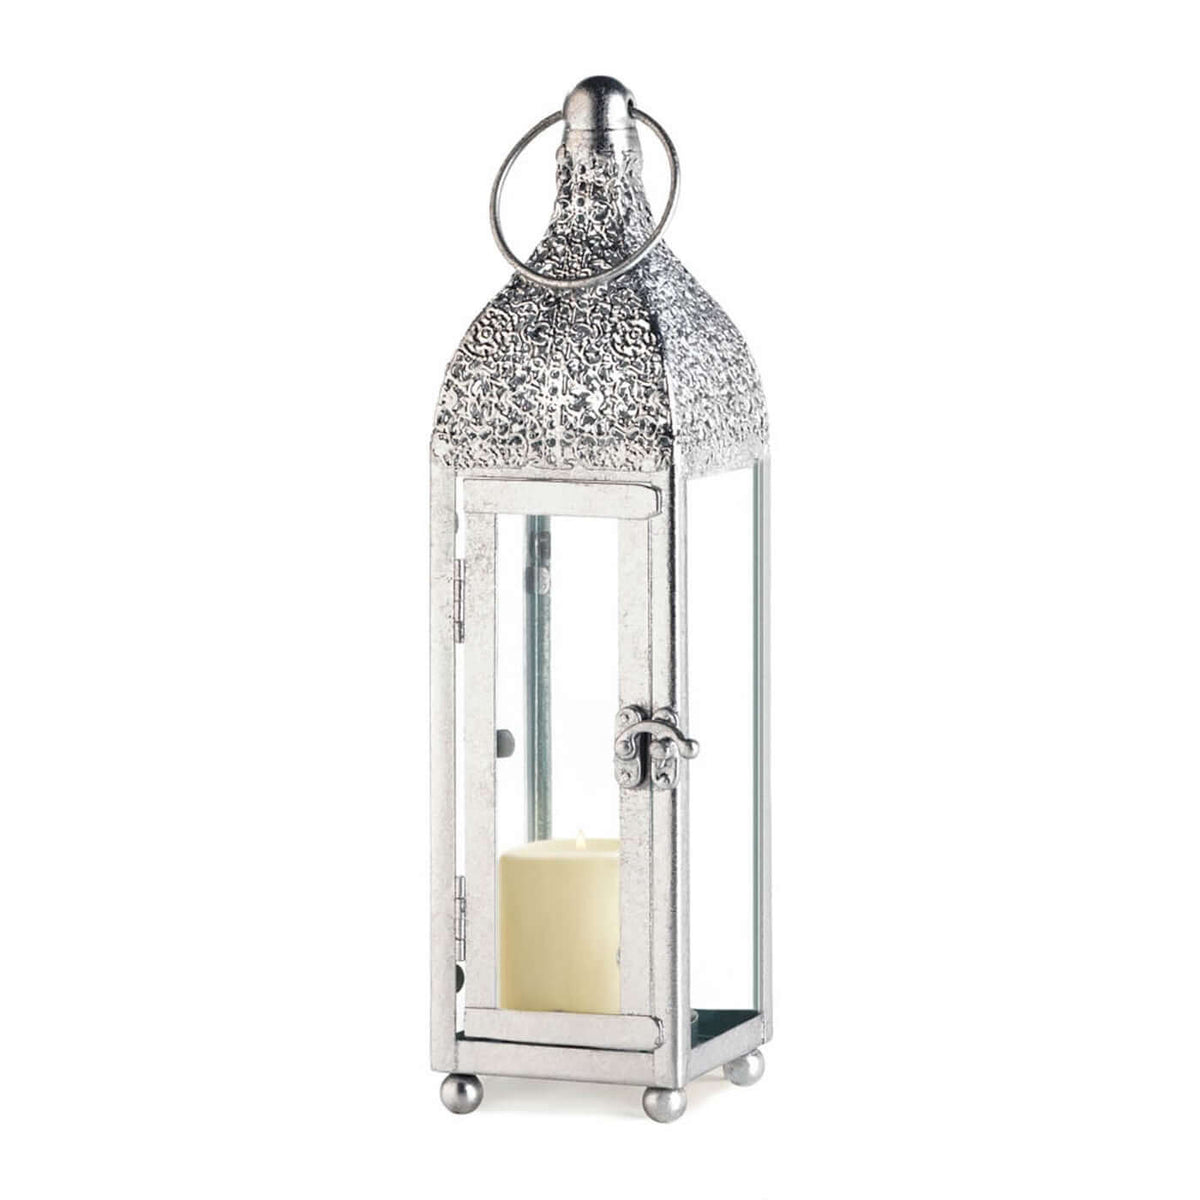  Ornate Candle Lantern-The House of Awareness